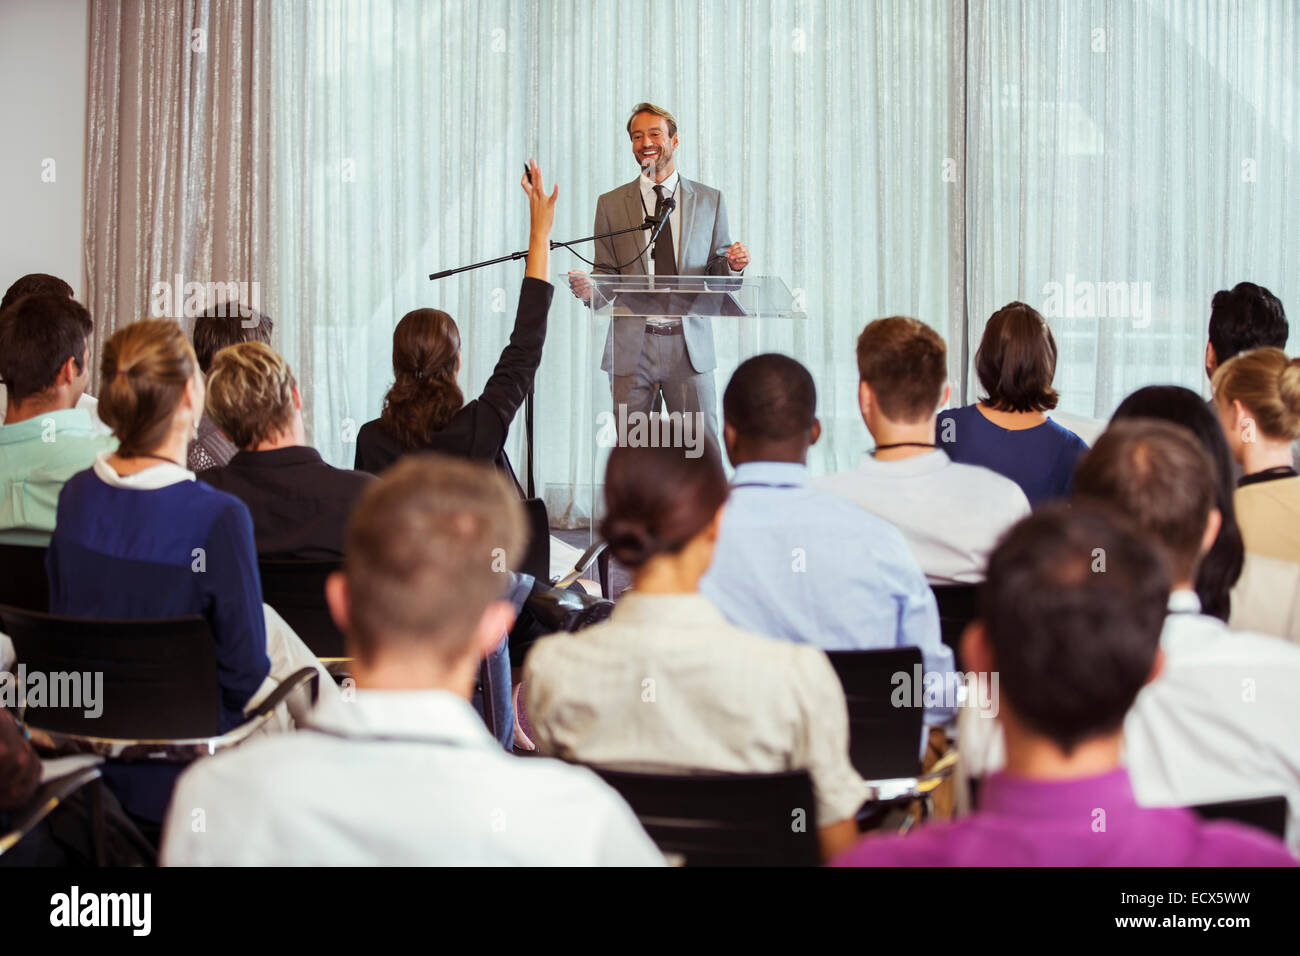 Businessman giving speech in conference room, woman from audience raising hand Stock Photo